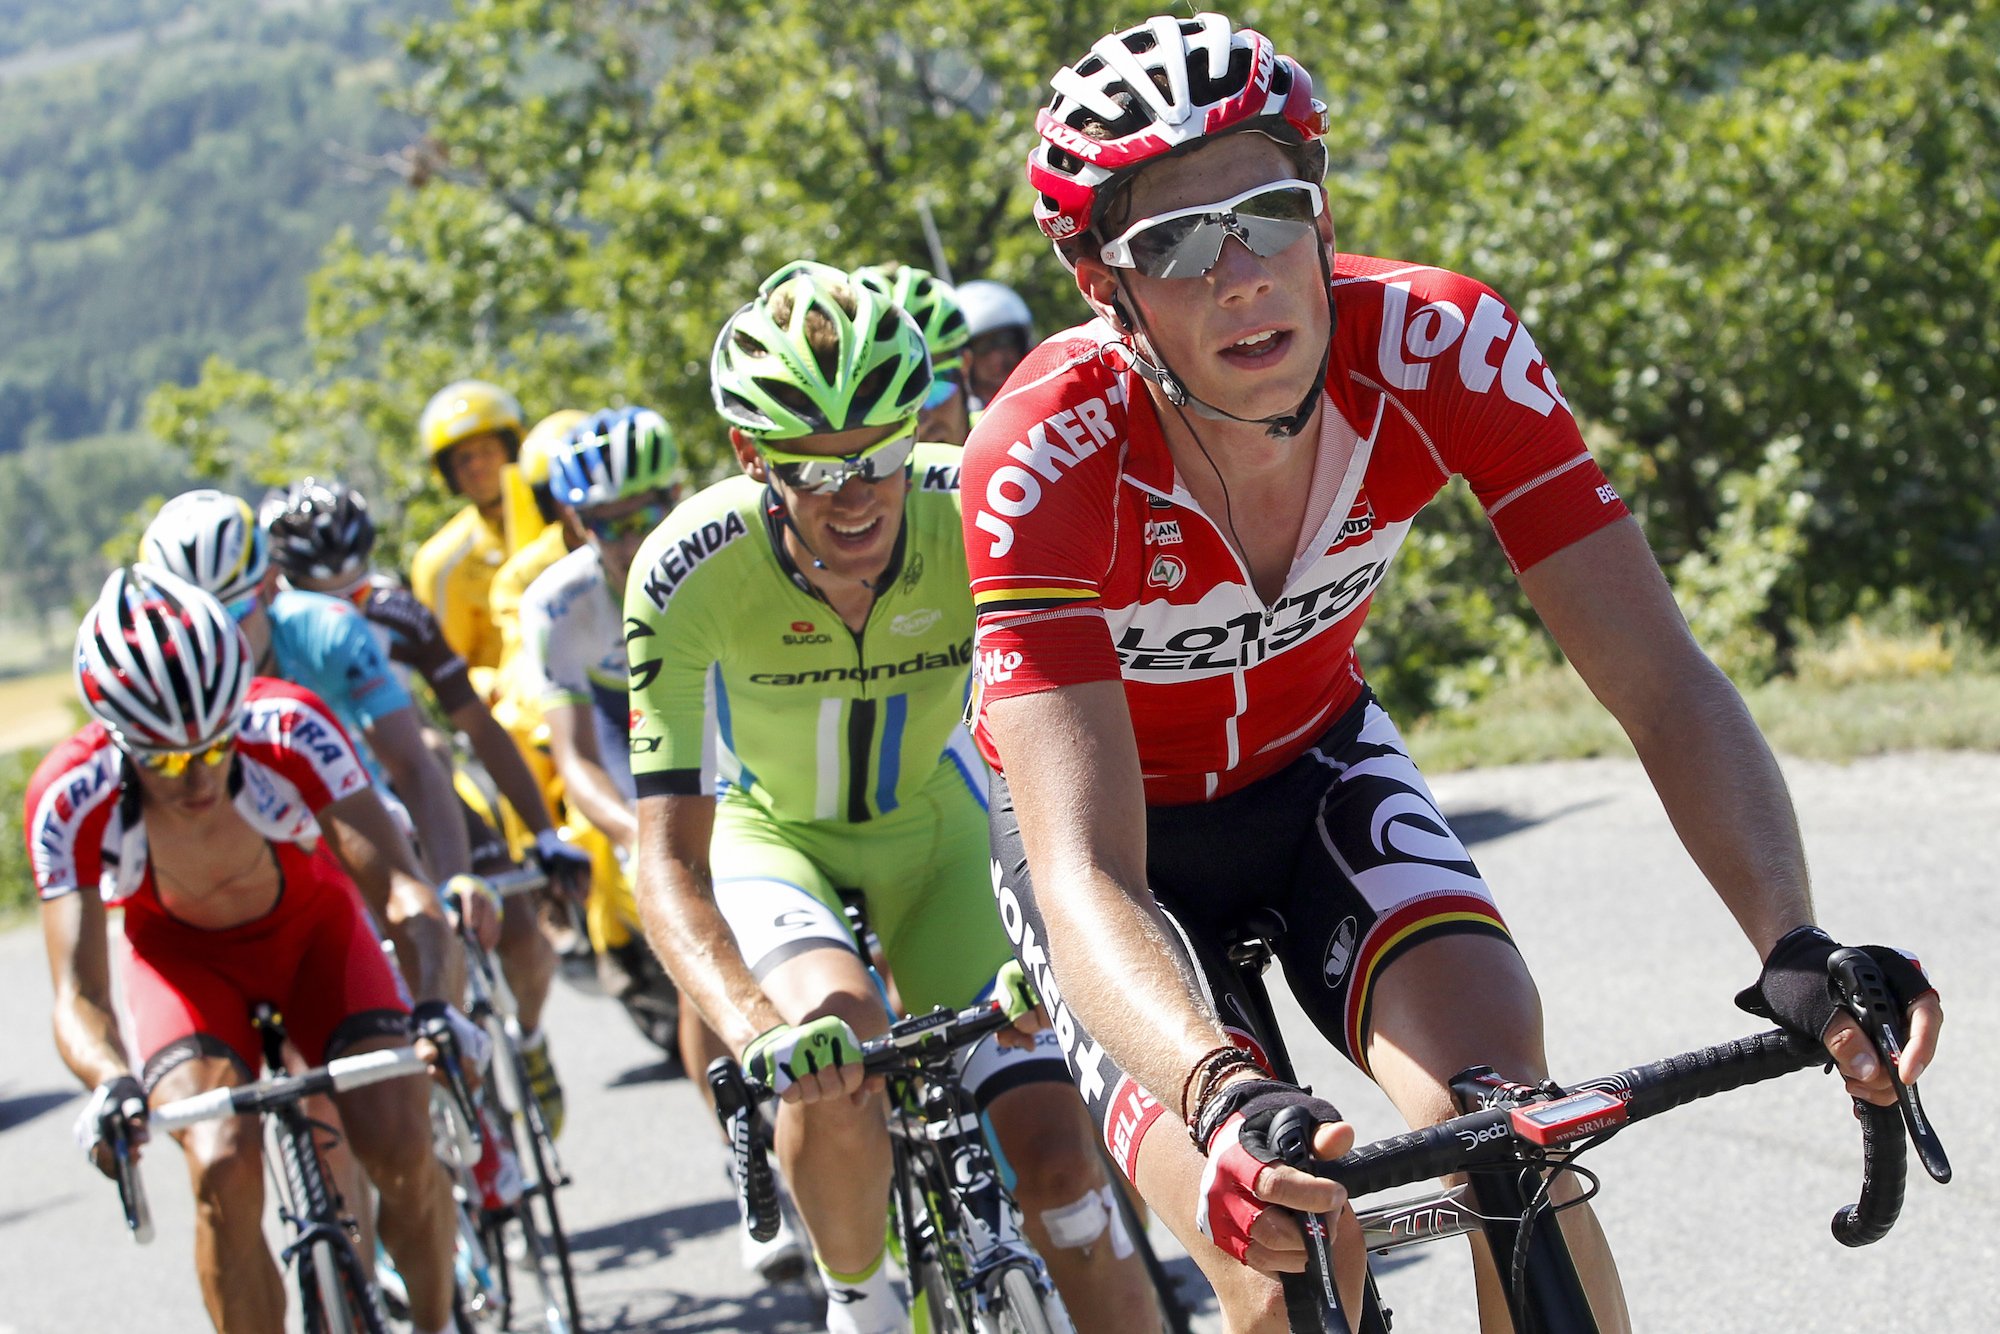 Motorcycle driver crashes pro cyclist - Business Insider